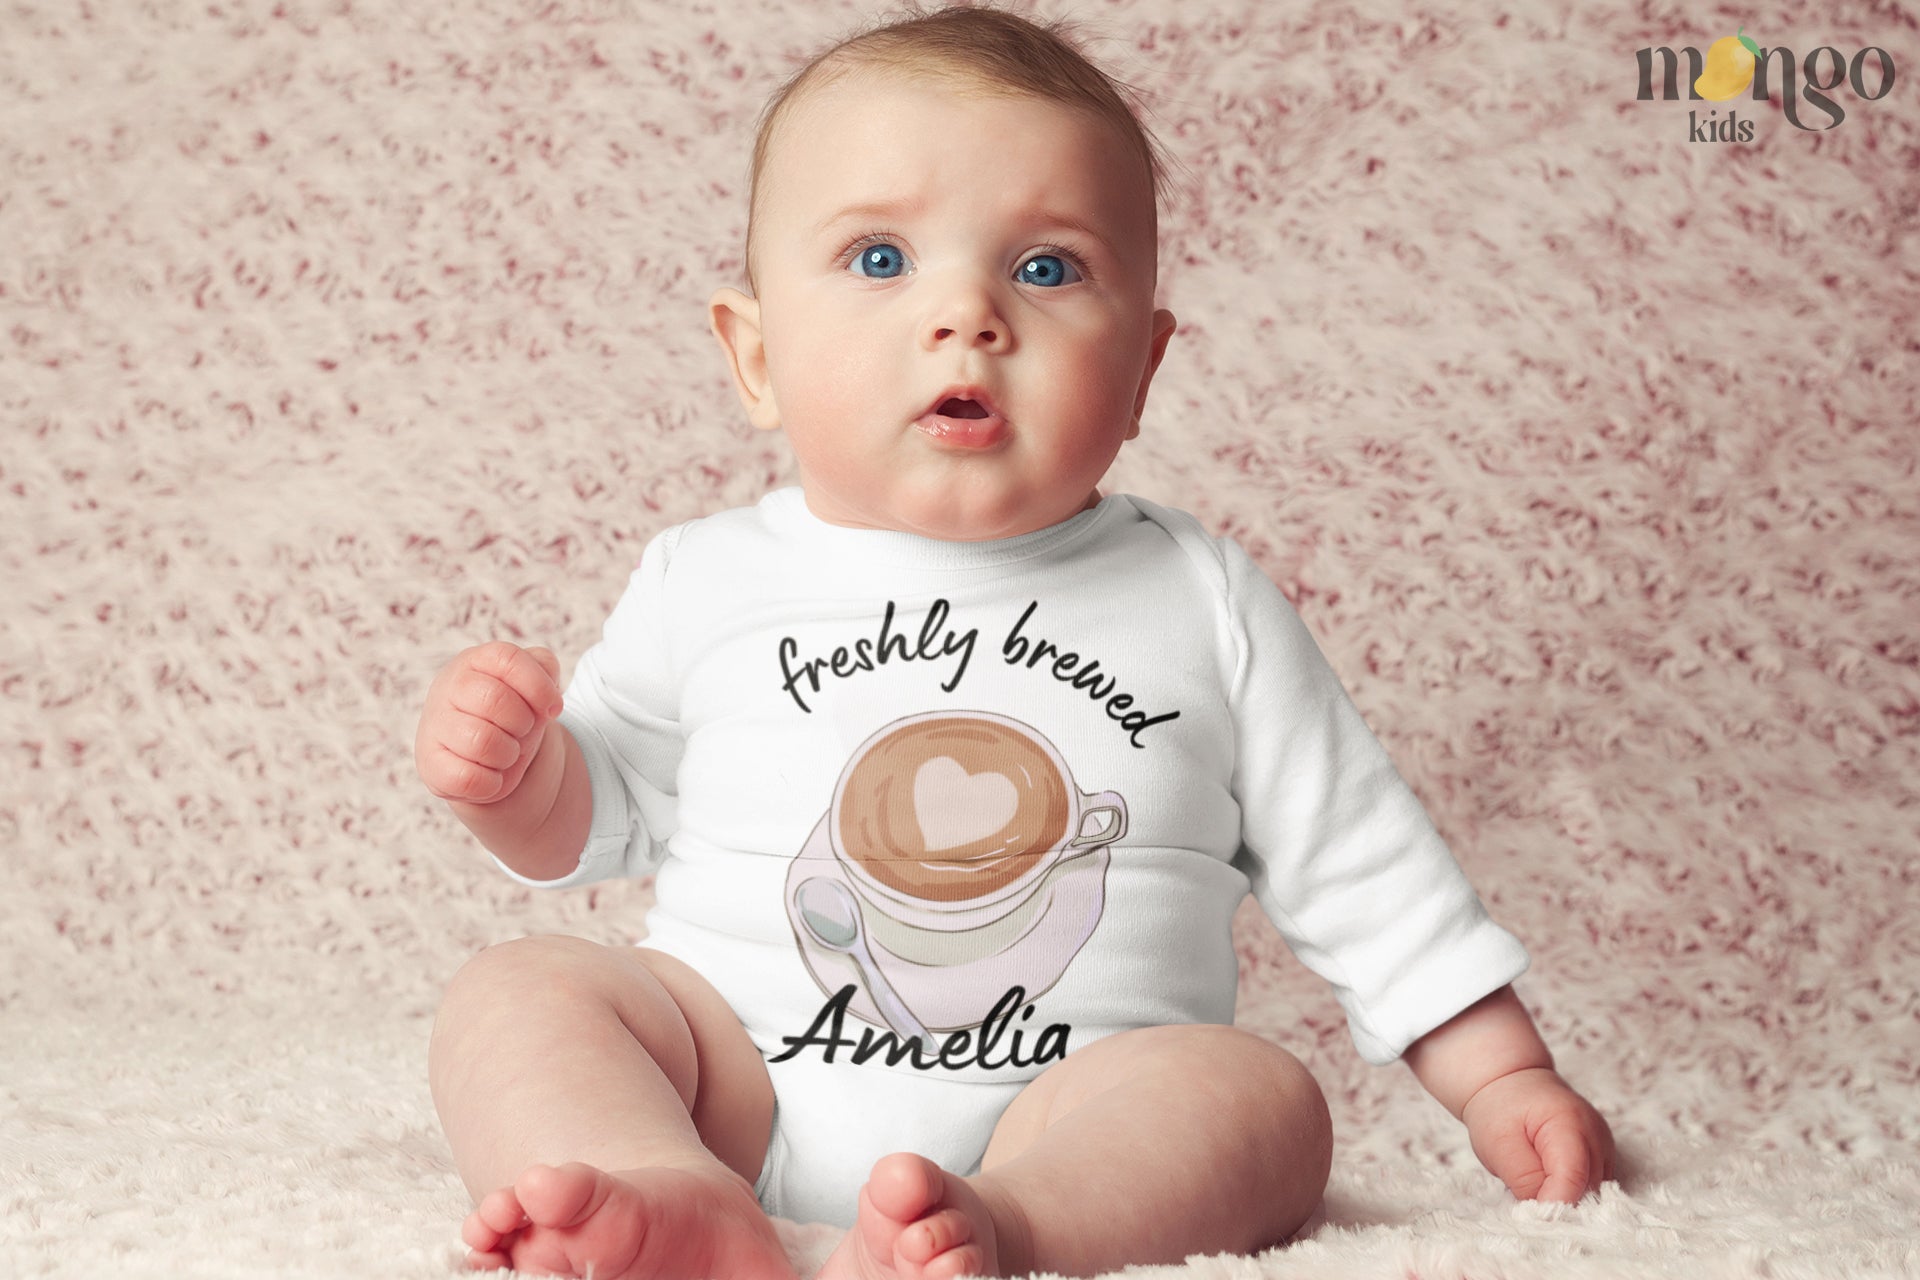 baby girl clothes baby essentials baby boy clothes newborn essentials must haves baby bodysuit gender neutral baby clothes baby boy outfits baby onesies newborn onesies baby girl onesies funny baby onesies baby announcement onesie personalized baby girl gifts custom baby onesie infant clothes